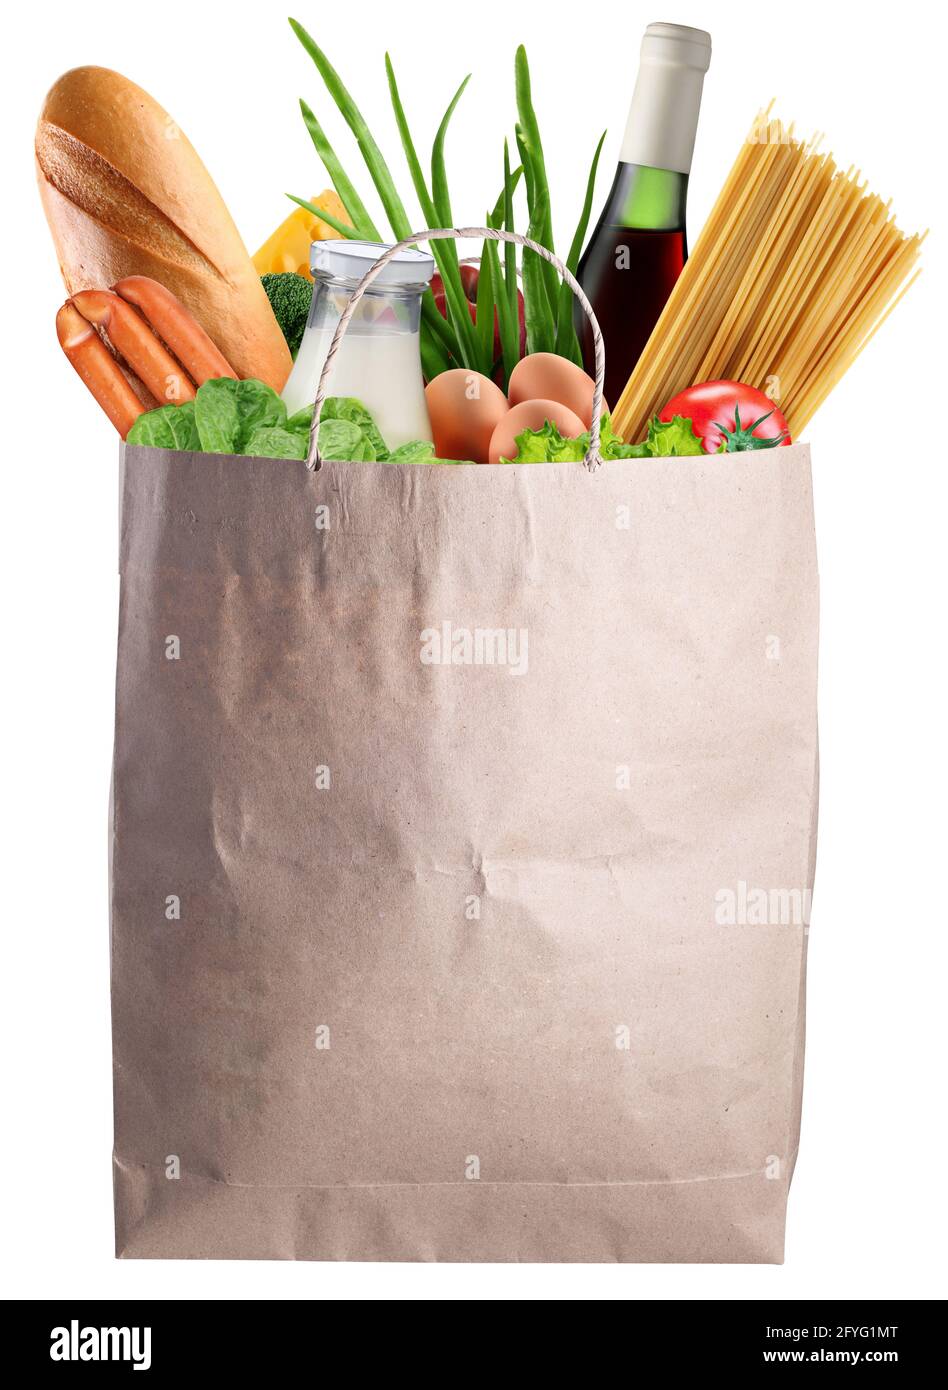 Grocery paper bag with fresh vegetables, bottle of wine and other foodstuffs on white background. File contains clipping path. Stock Photo